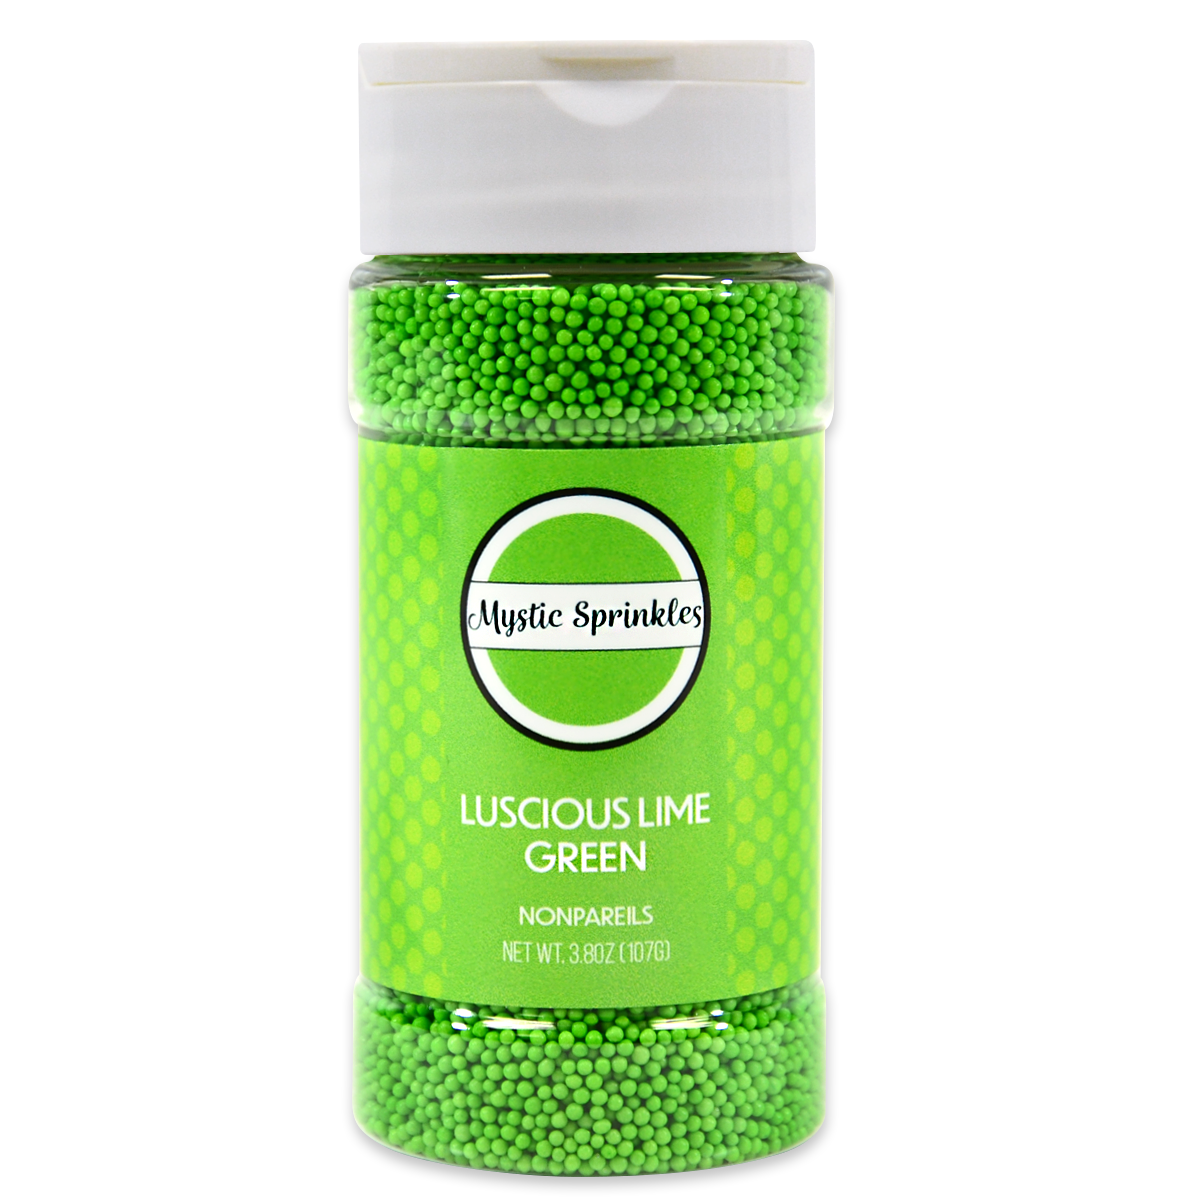 Mystic Sprinkles Luscious Lime Green Nonpareils 3.8 Ounce Bottle - image 2 of 4